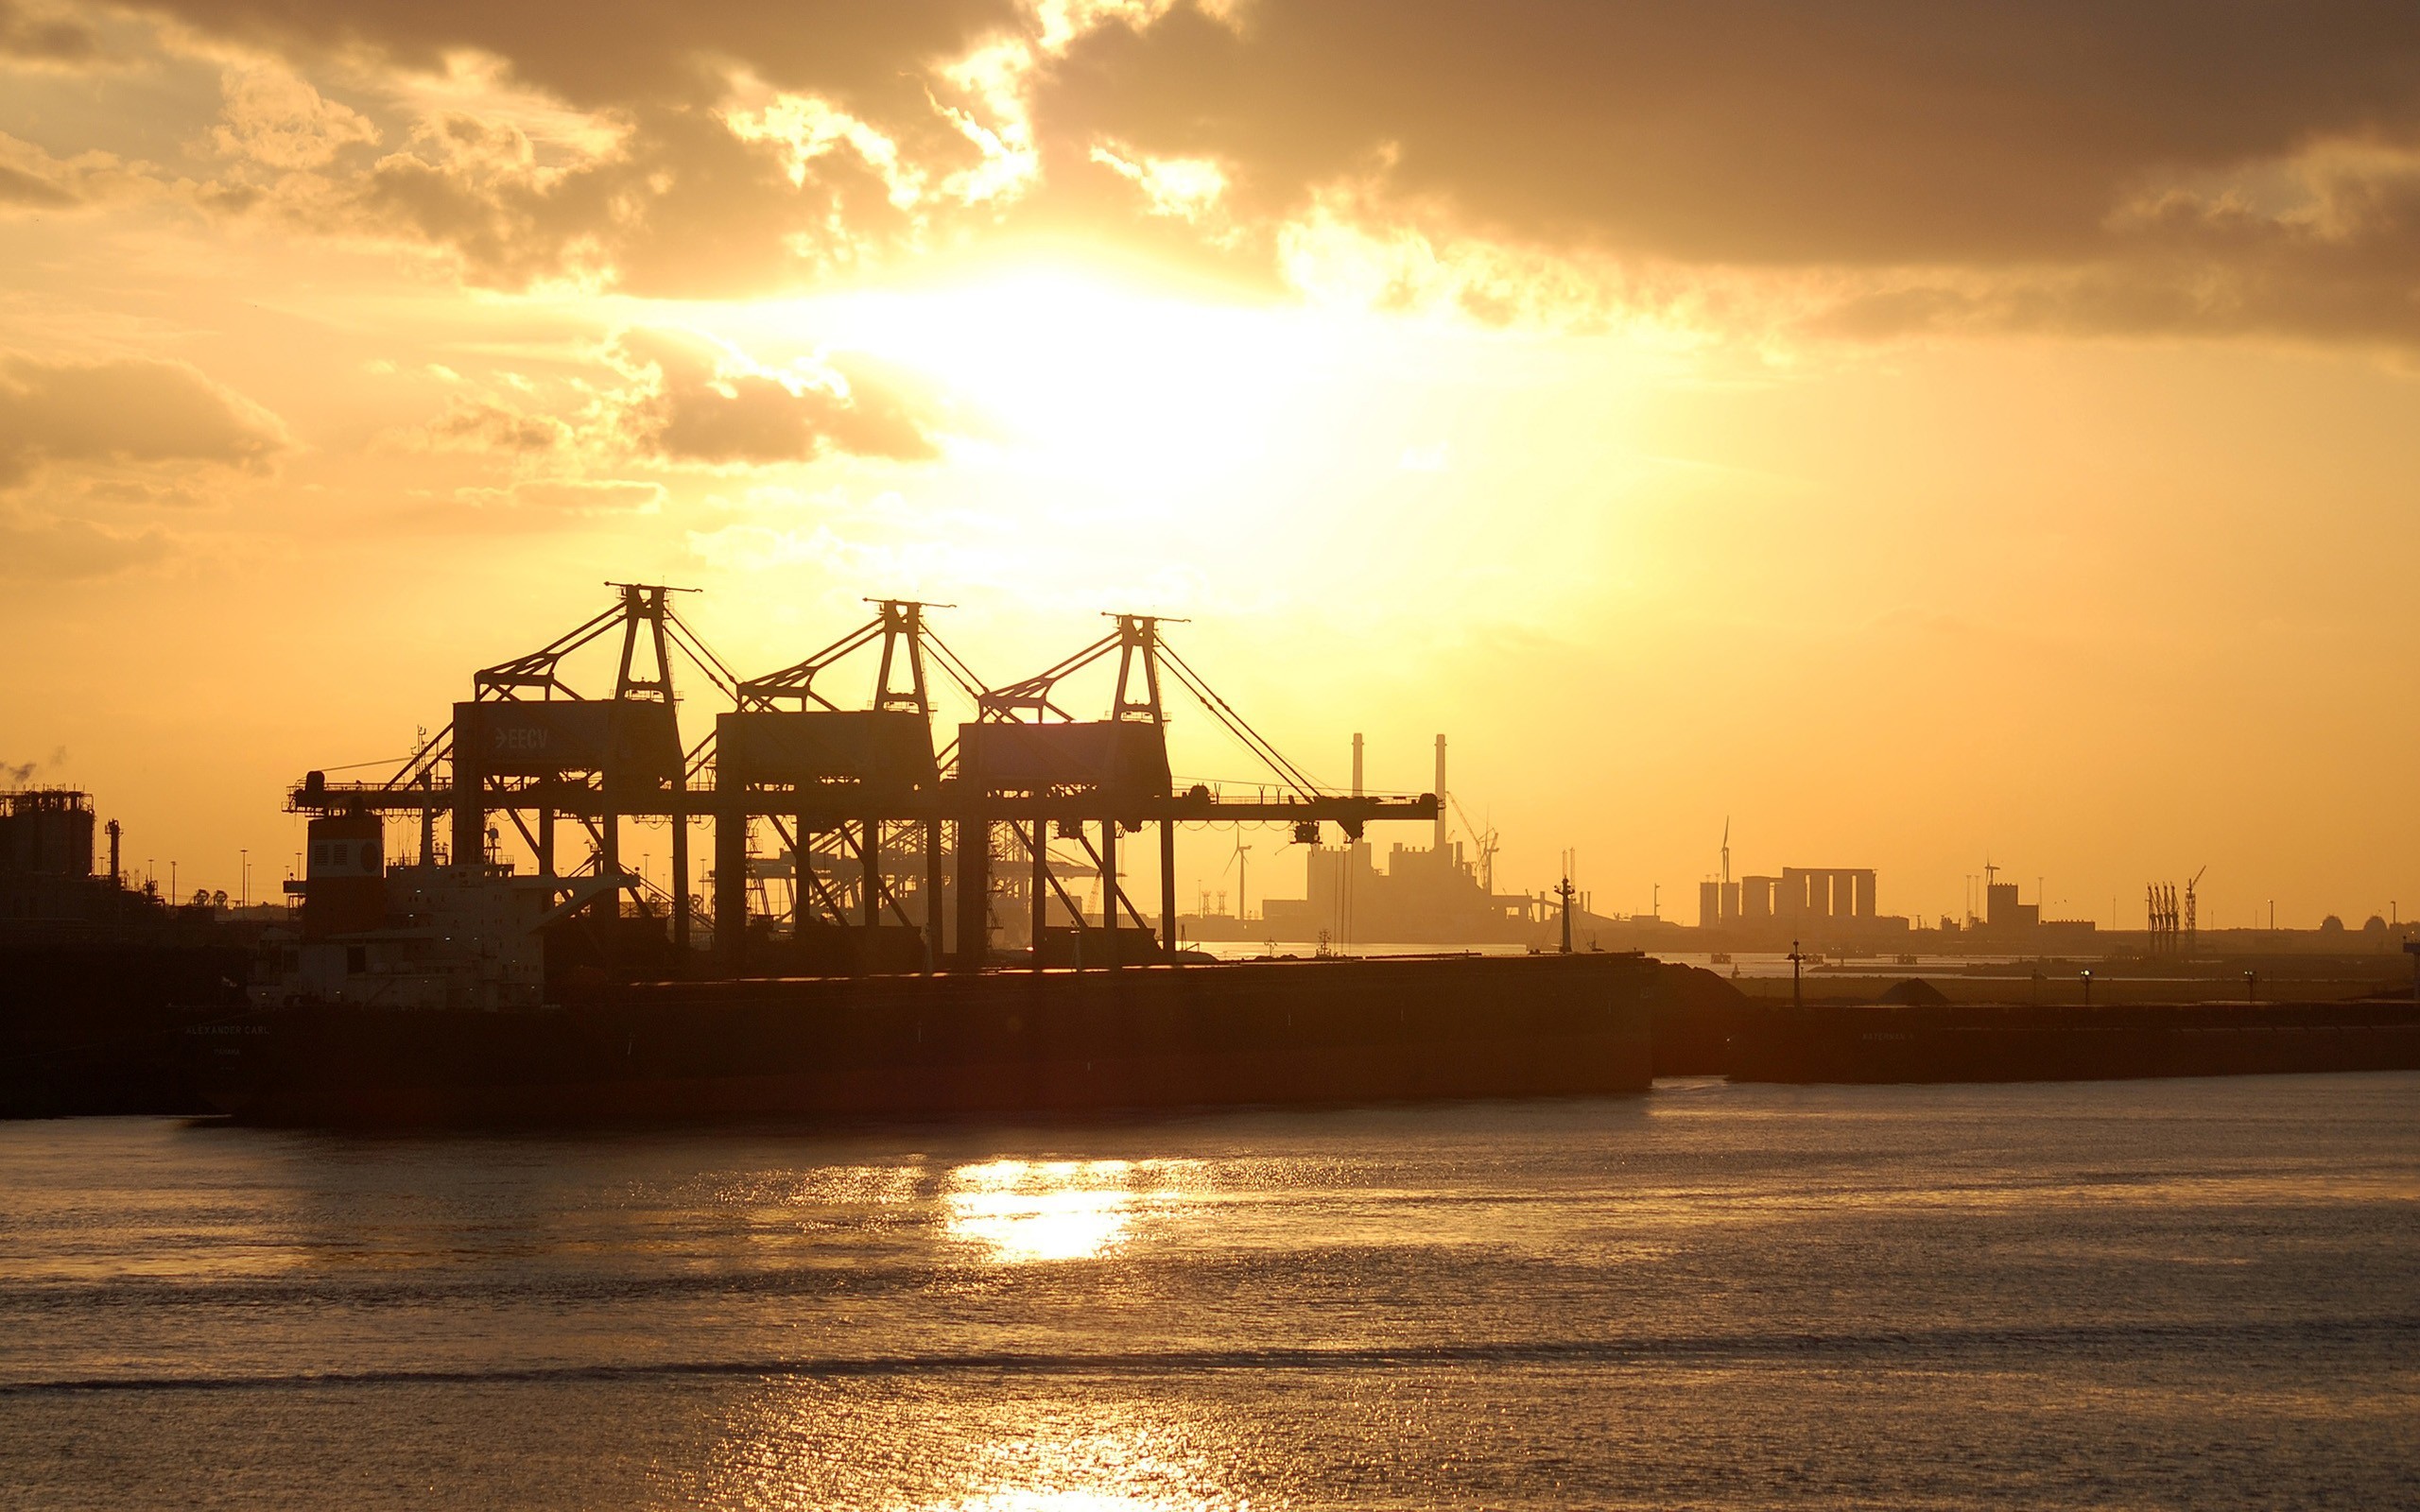 photography, Industrial, Cranes (machine), Sunset, Harbor, Sea, Water, Ship, Ports Wallpaper